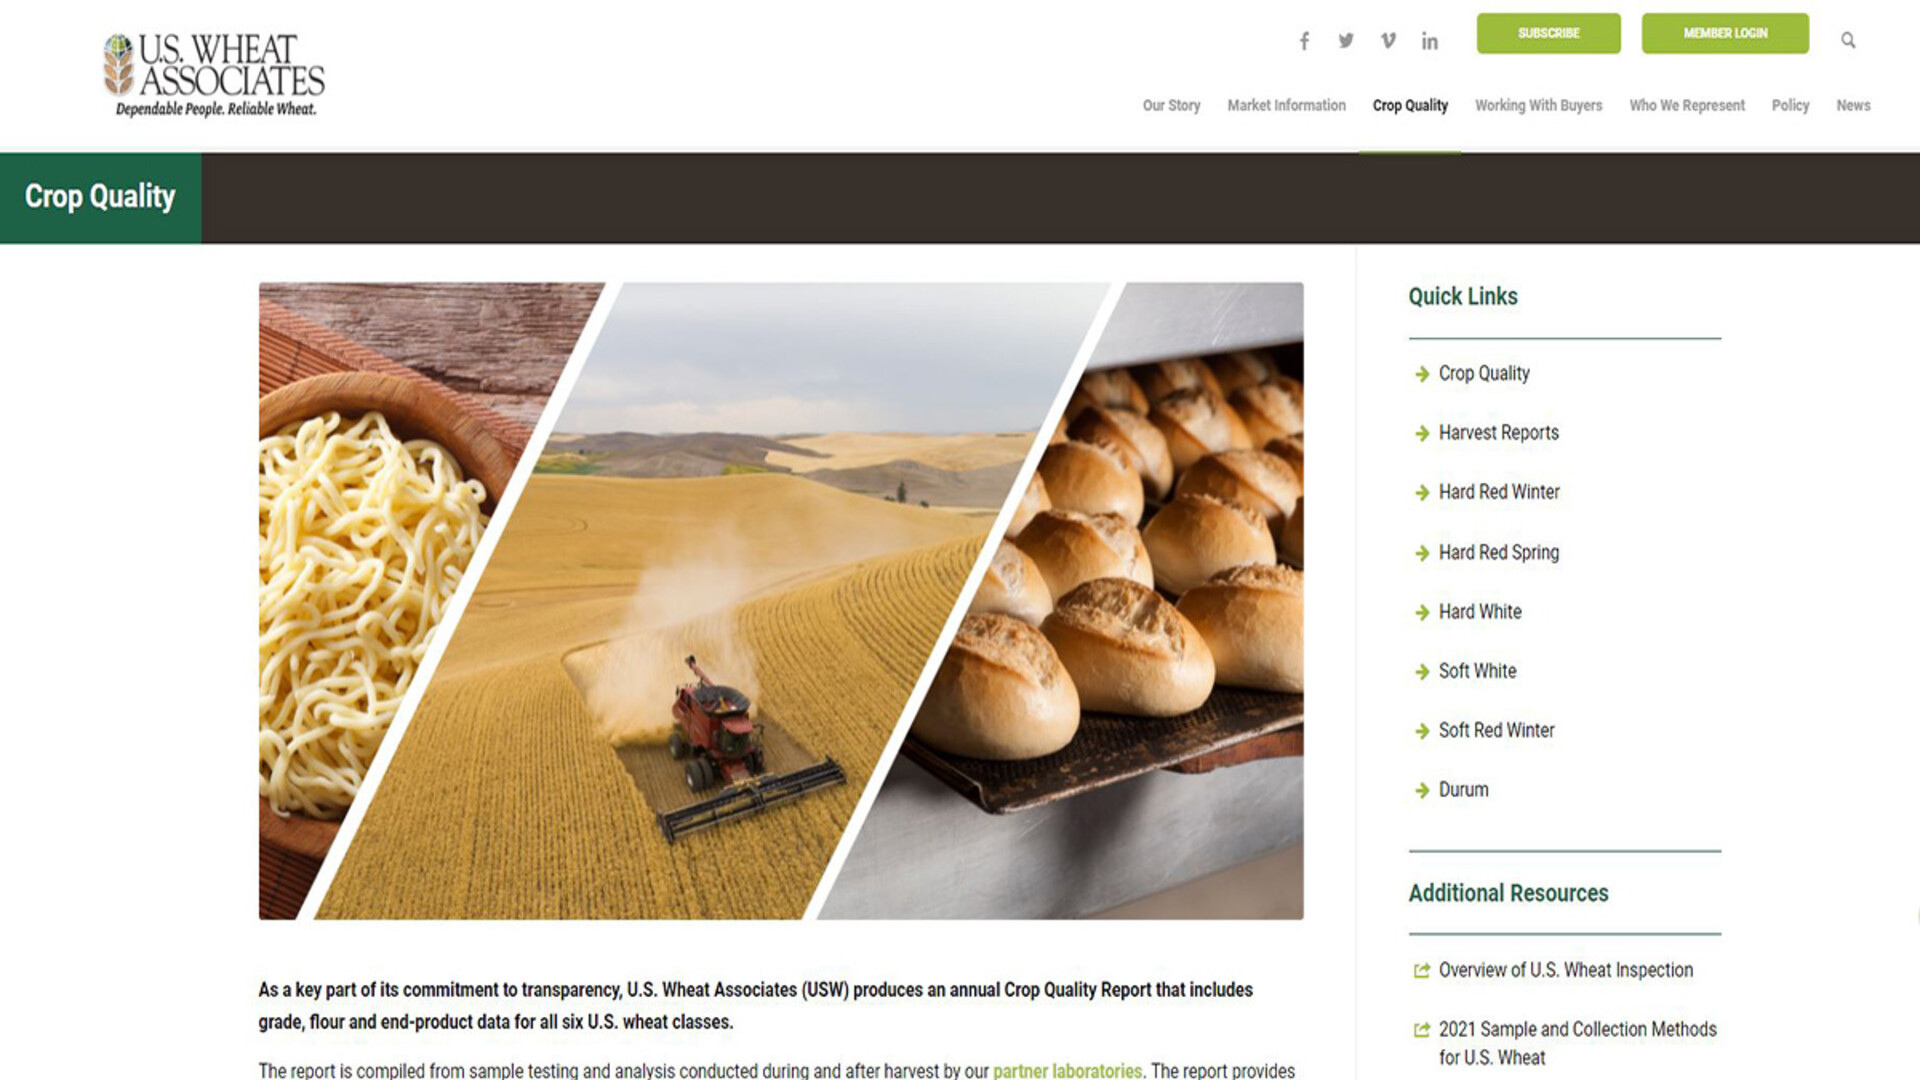 U.S. Wheat Associates Renovated Website Increases Focus On Crop Quality